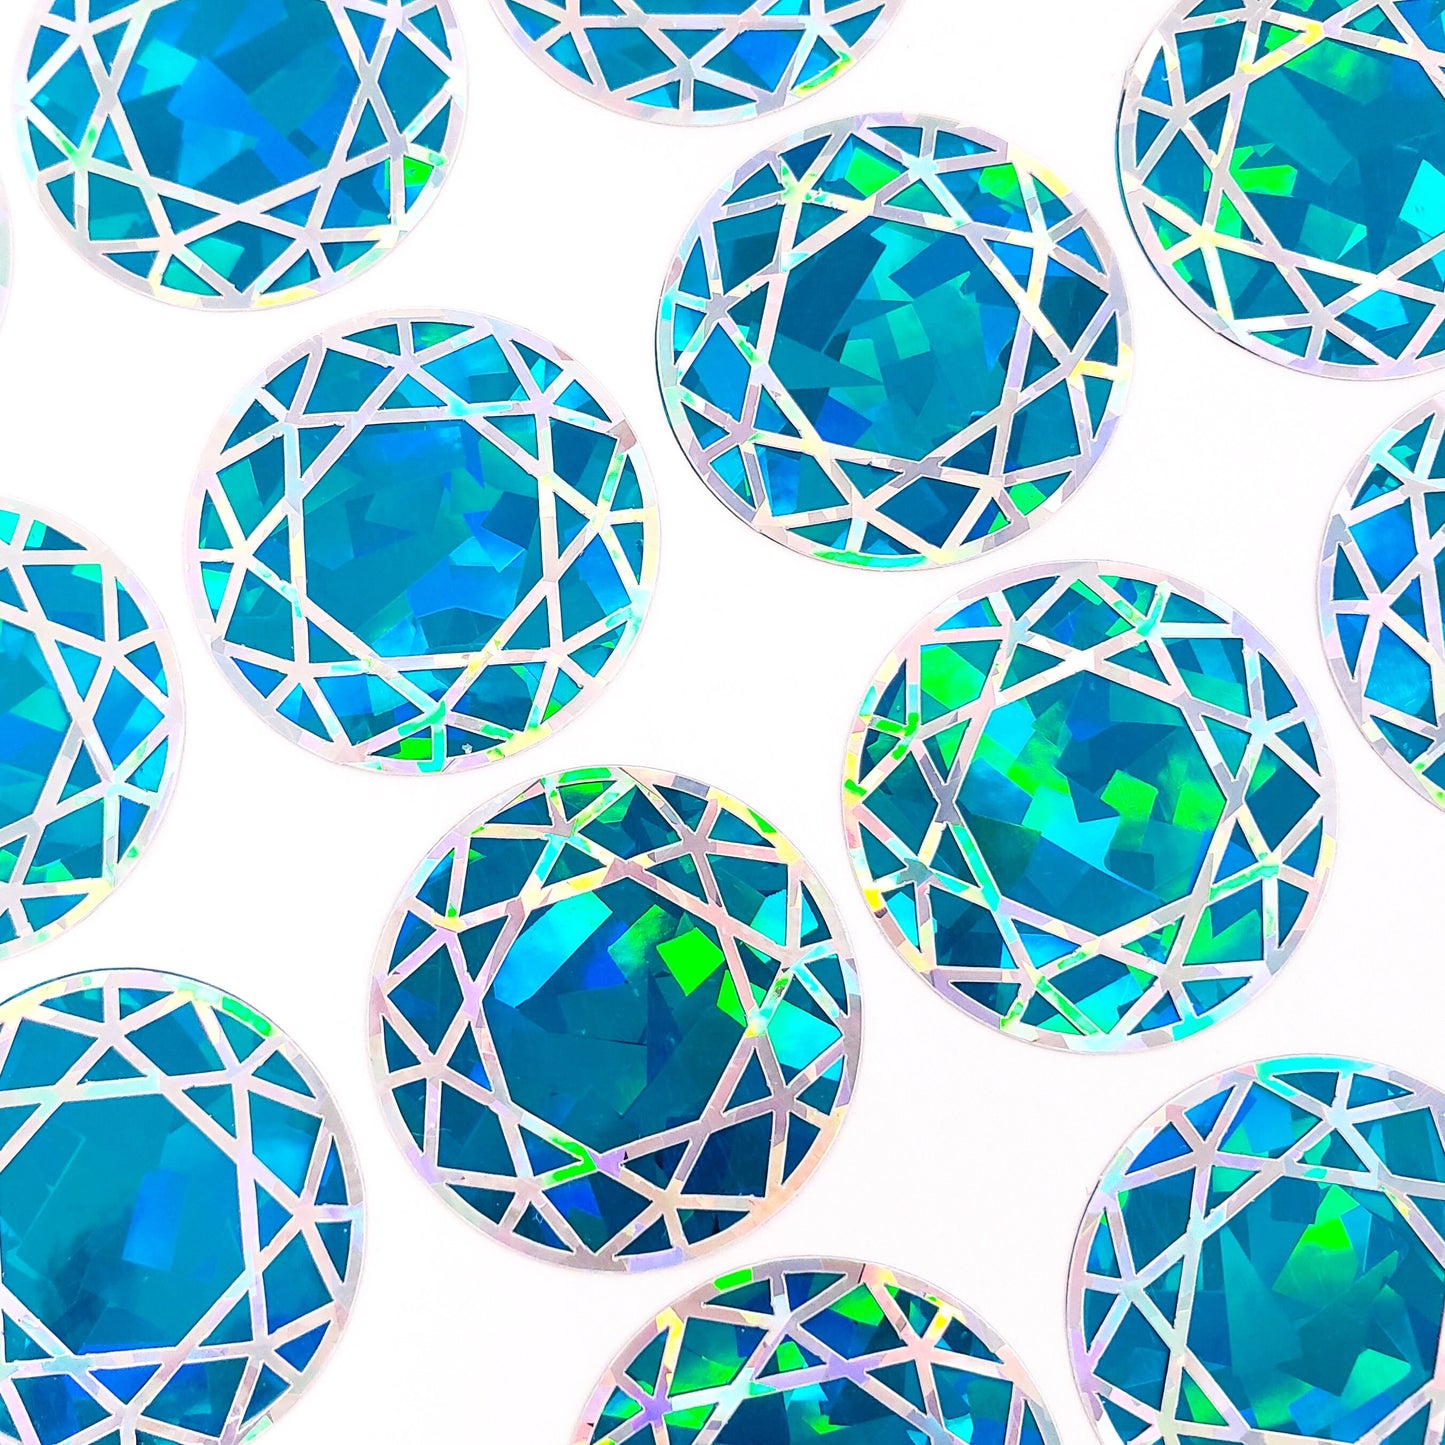 Birthstone stickers, set of 20 small sparkly round turquoise gemstone decals for gifts, notecards, journals and scrapbook embellishments.